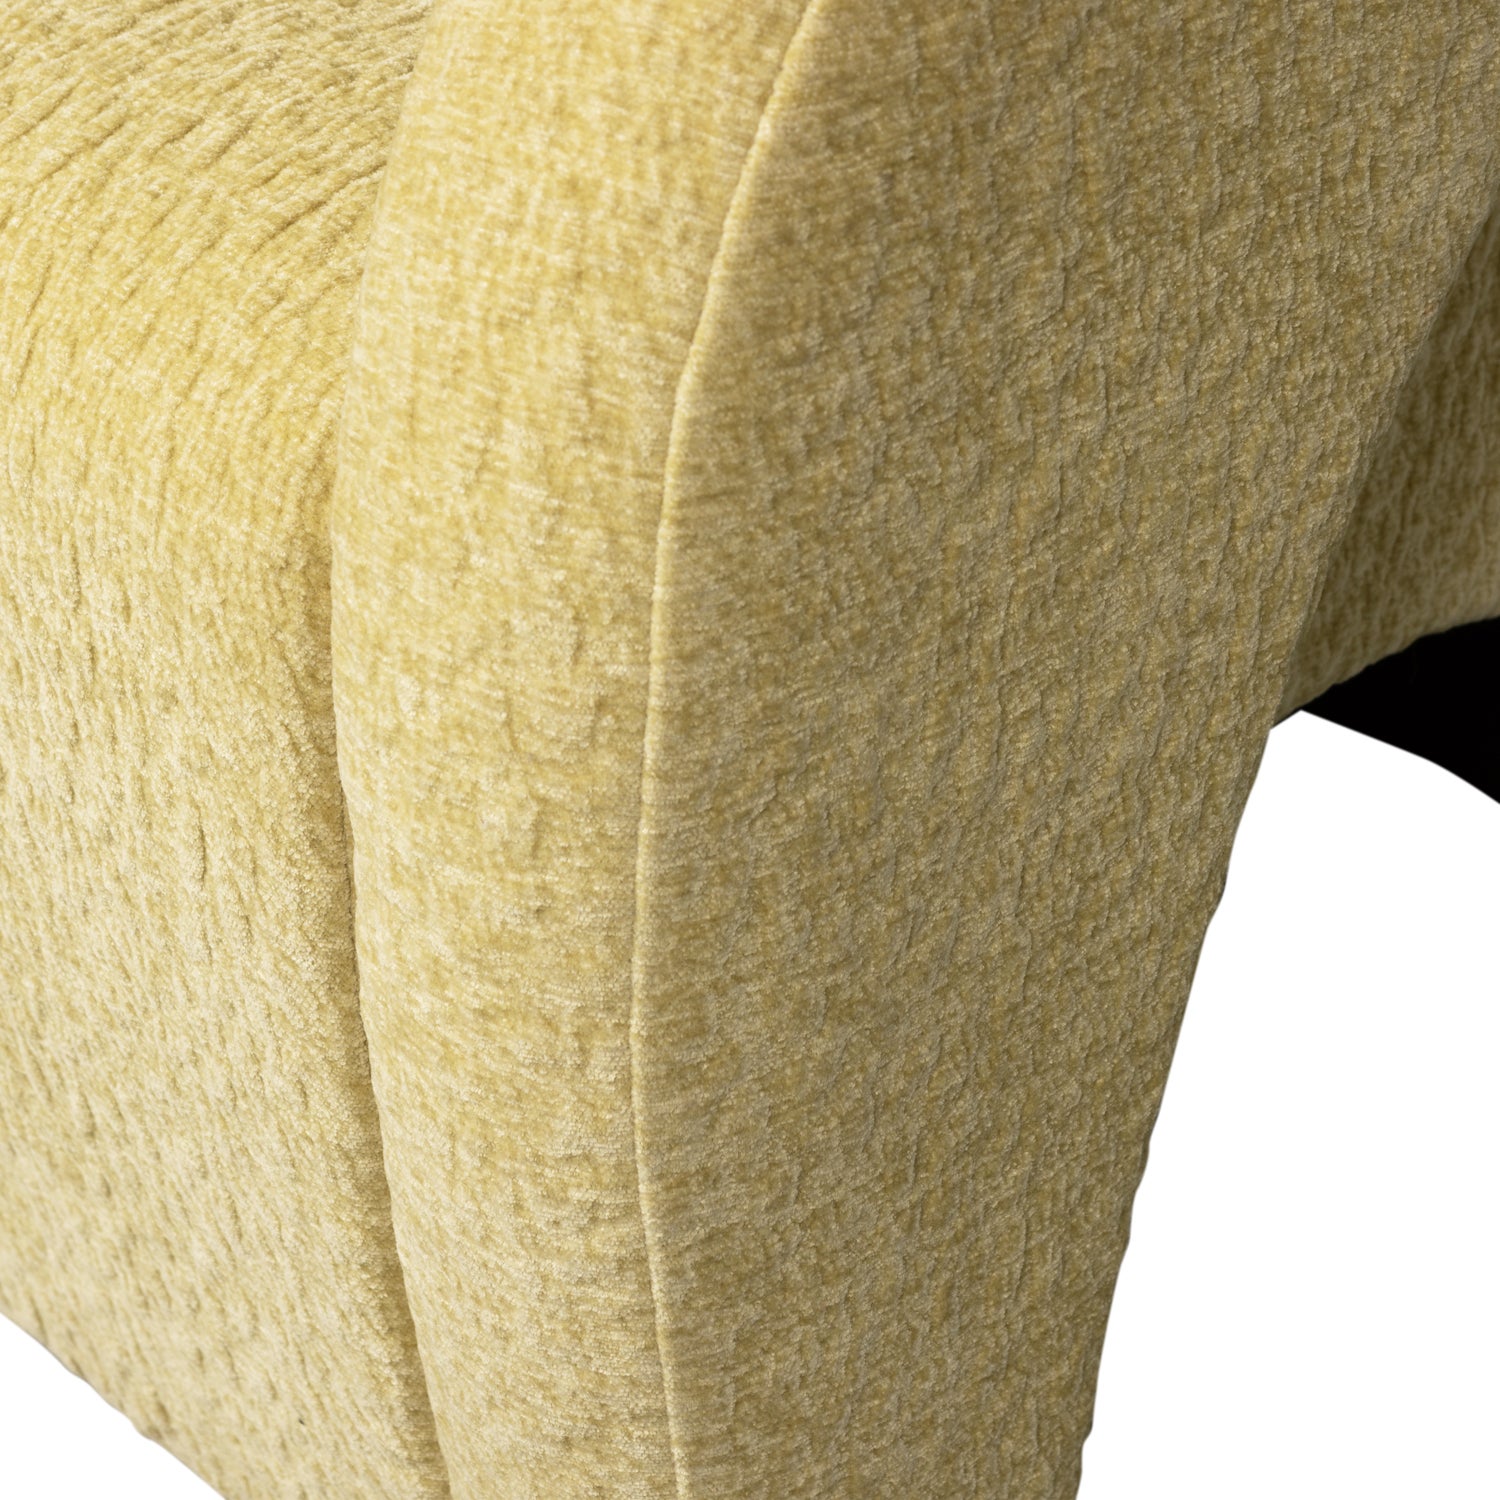 801432-L-01_VS_BP_Radiate_fauteuil_textured_lime_detail.png?auto=webp&format=png&width=1500&height=1500